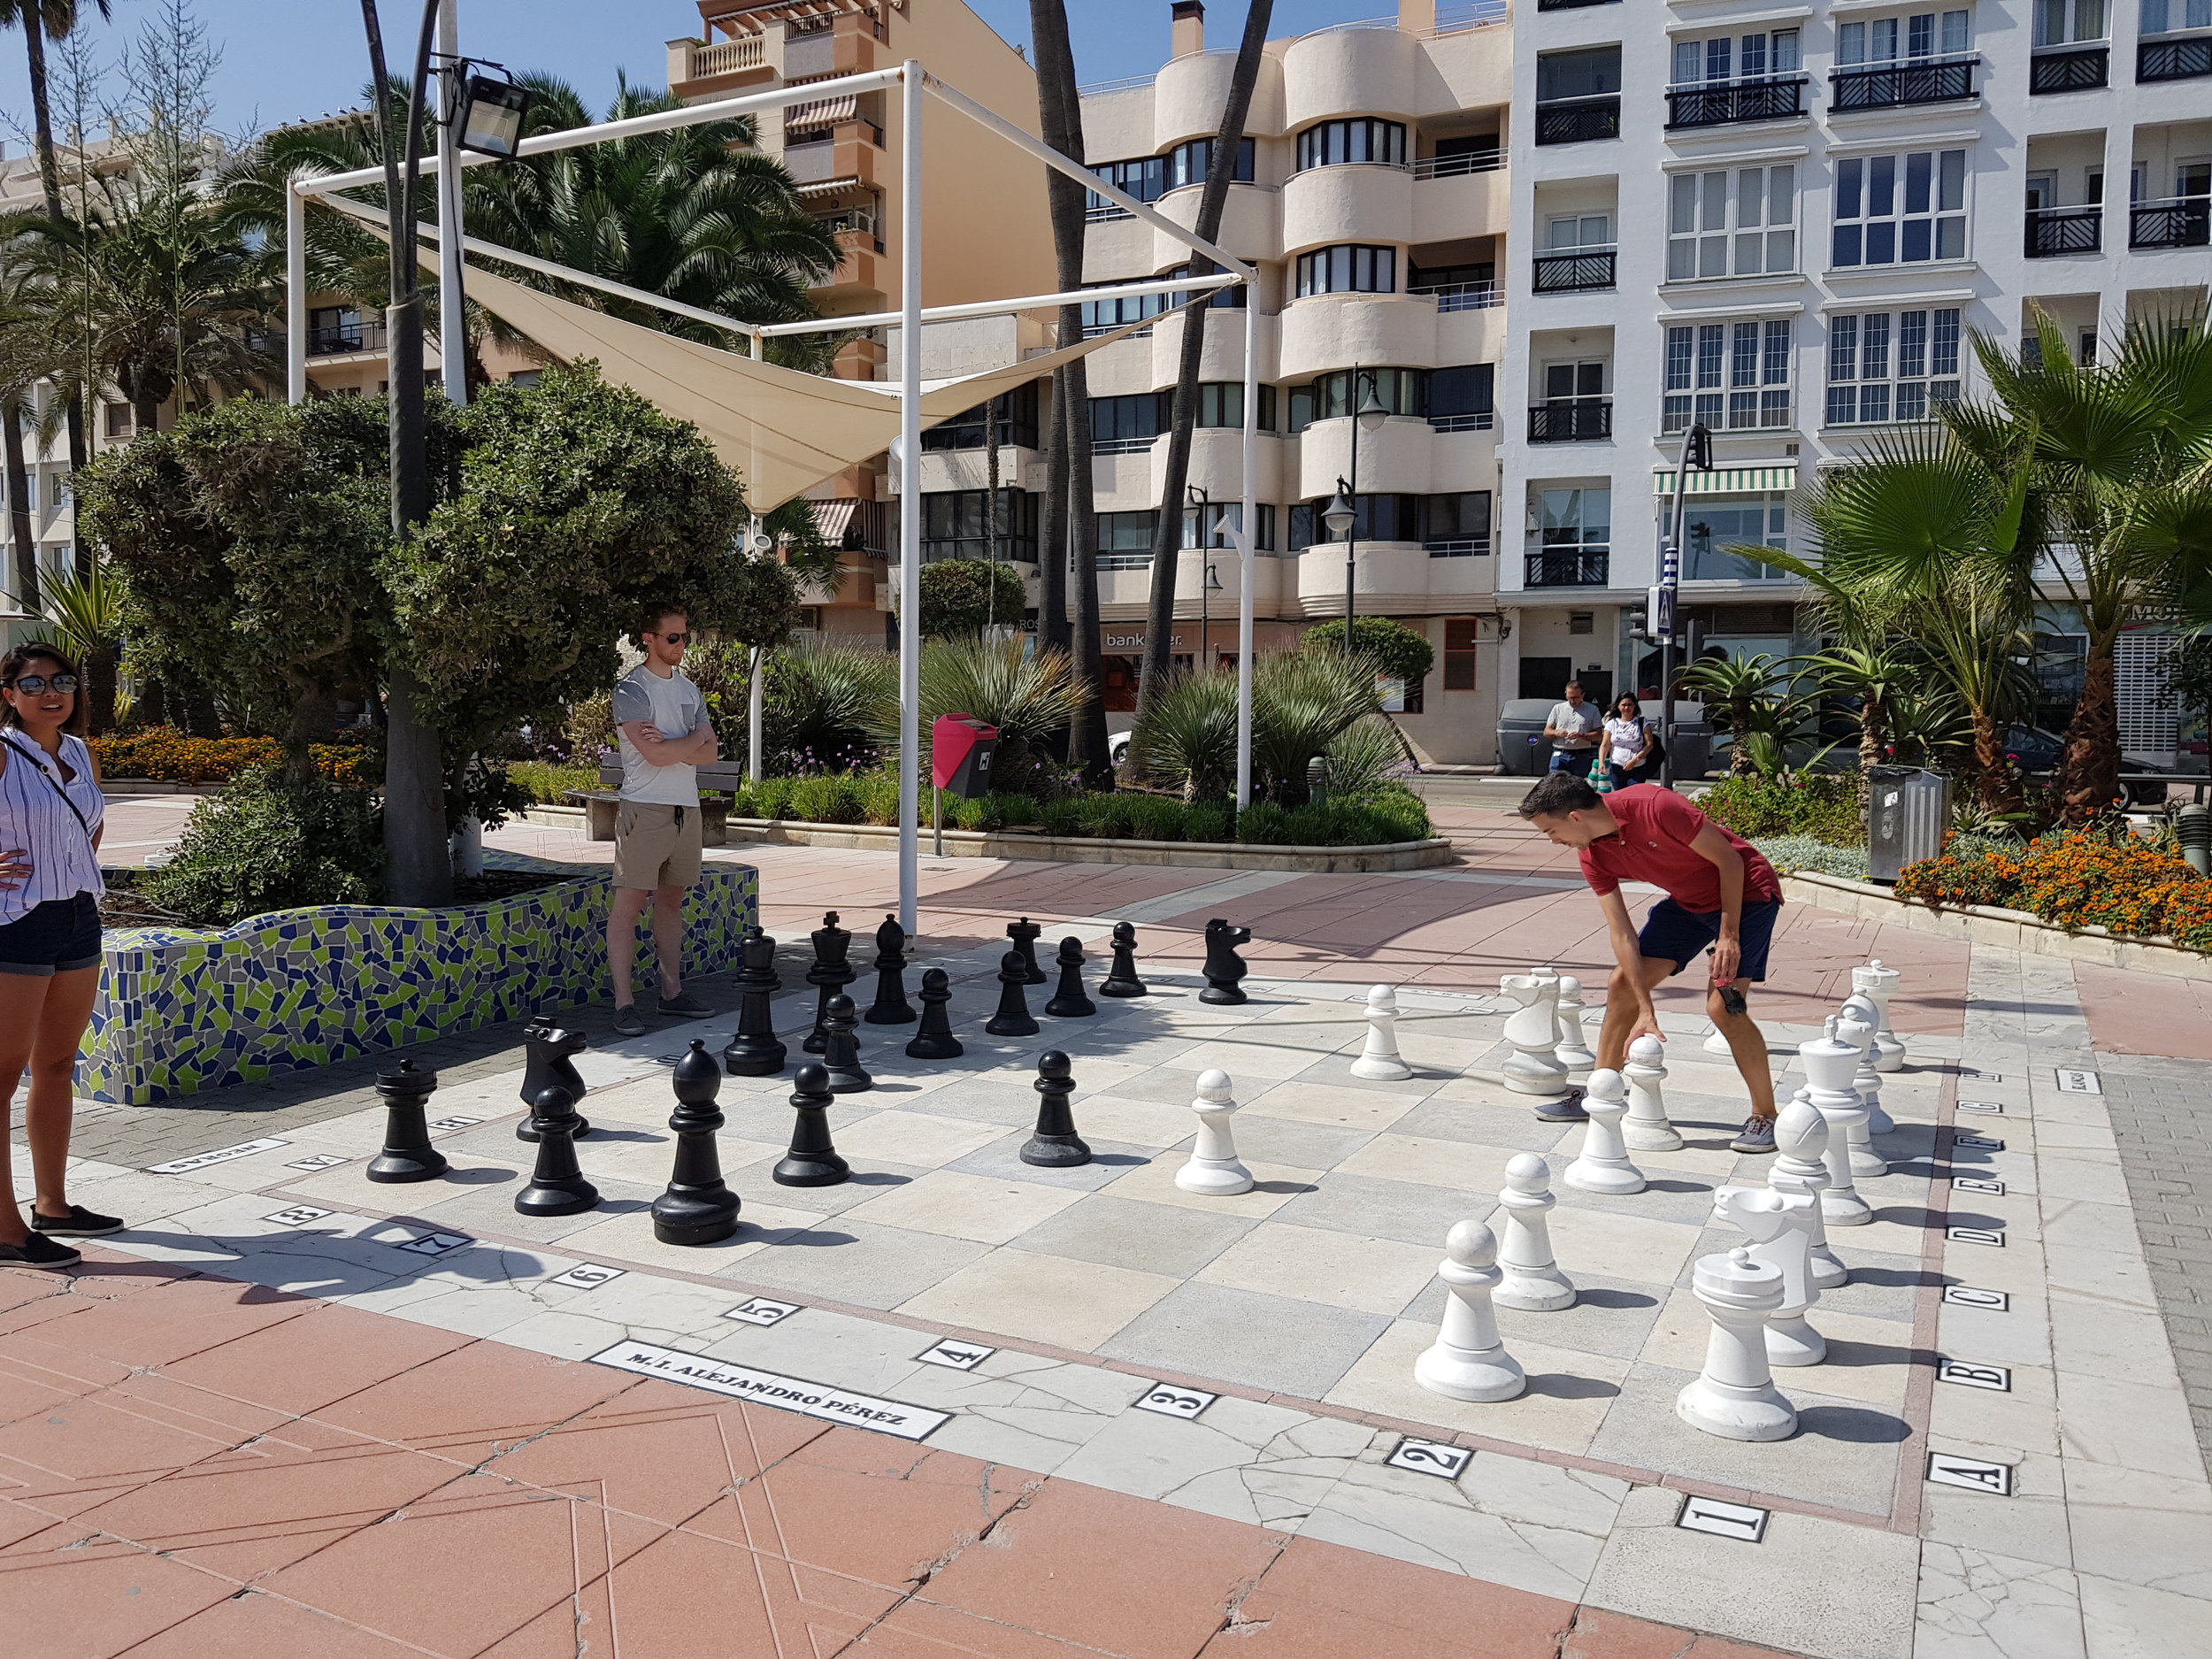 You may even happen upon life-size chess on the Paseo Marítimo!